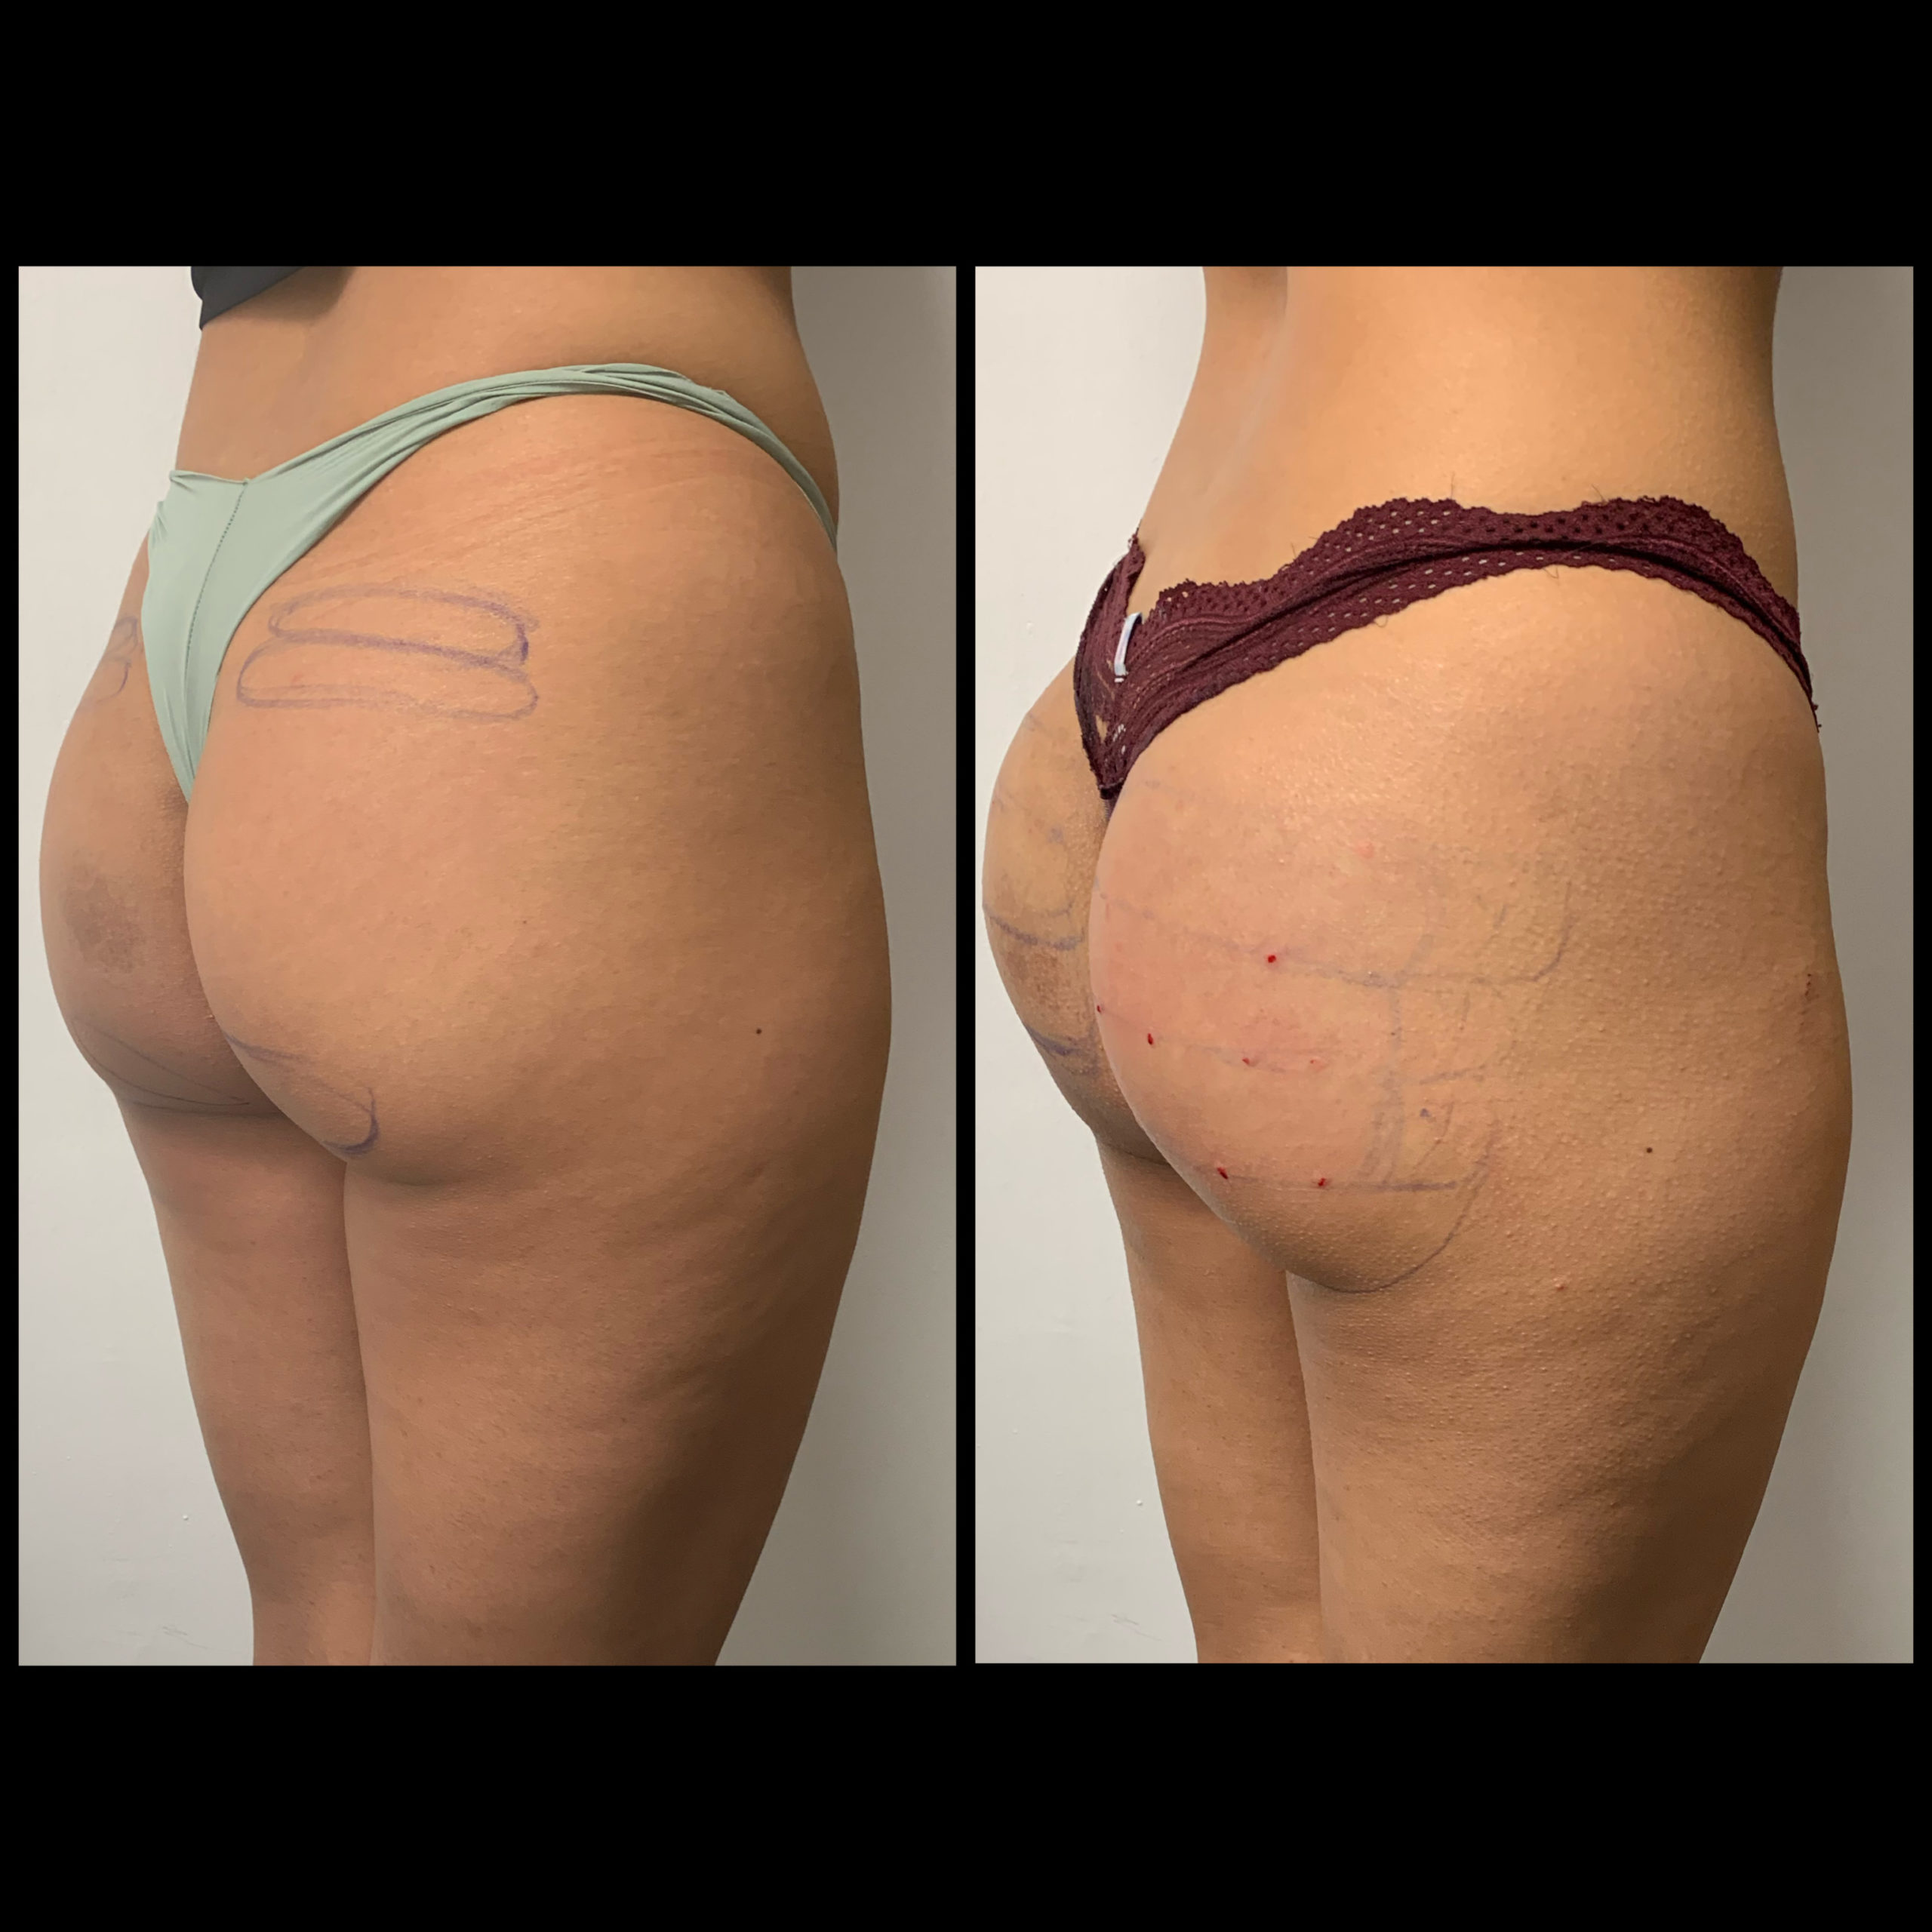 Sculptra BBL Before & After Photos | The Better Body Shop MedSpa In Houston, TX